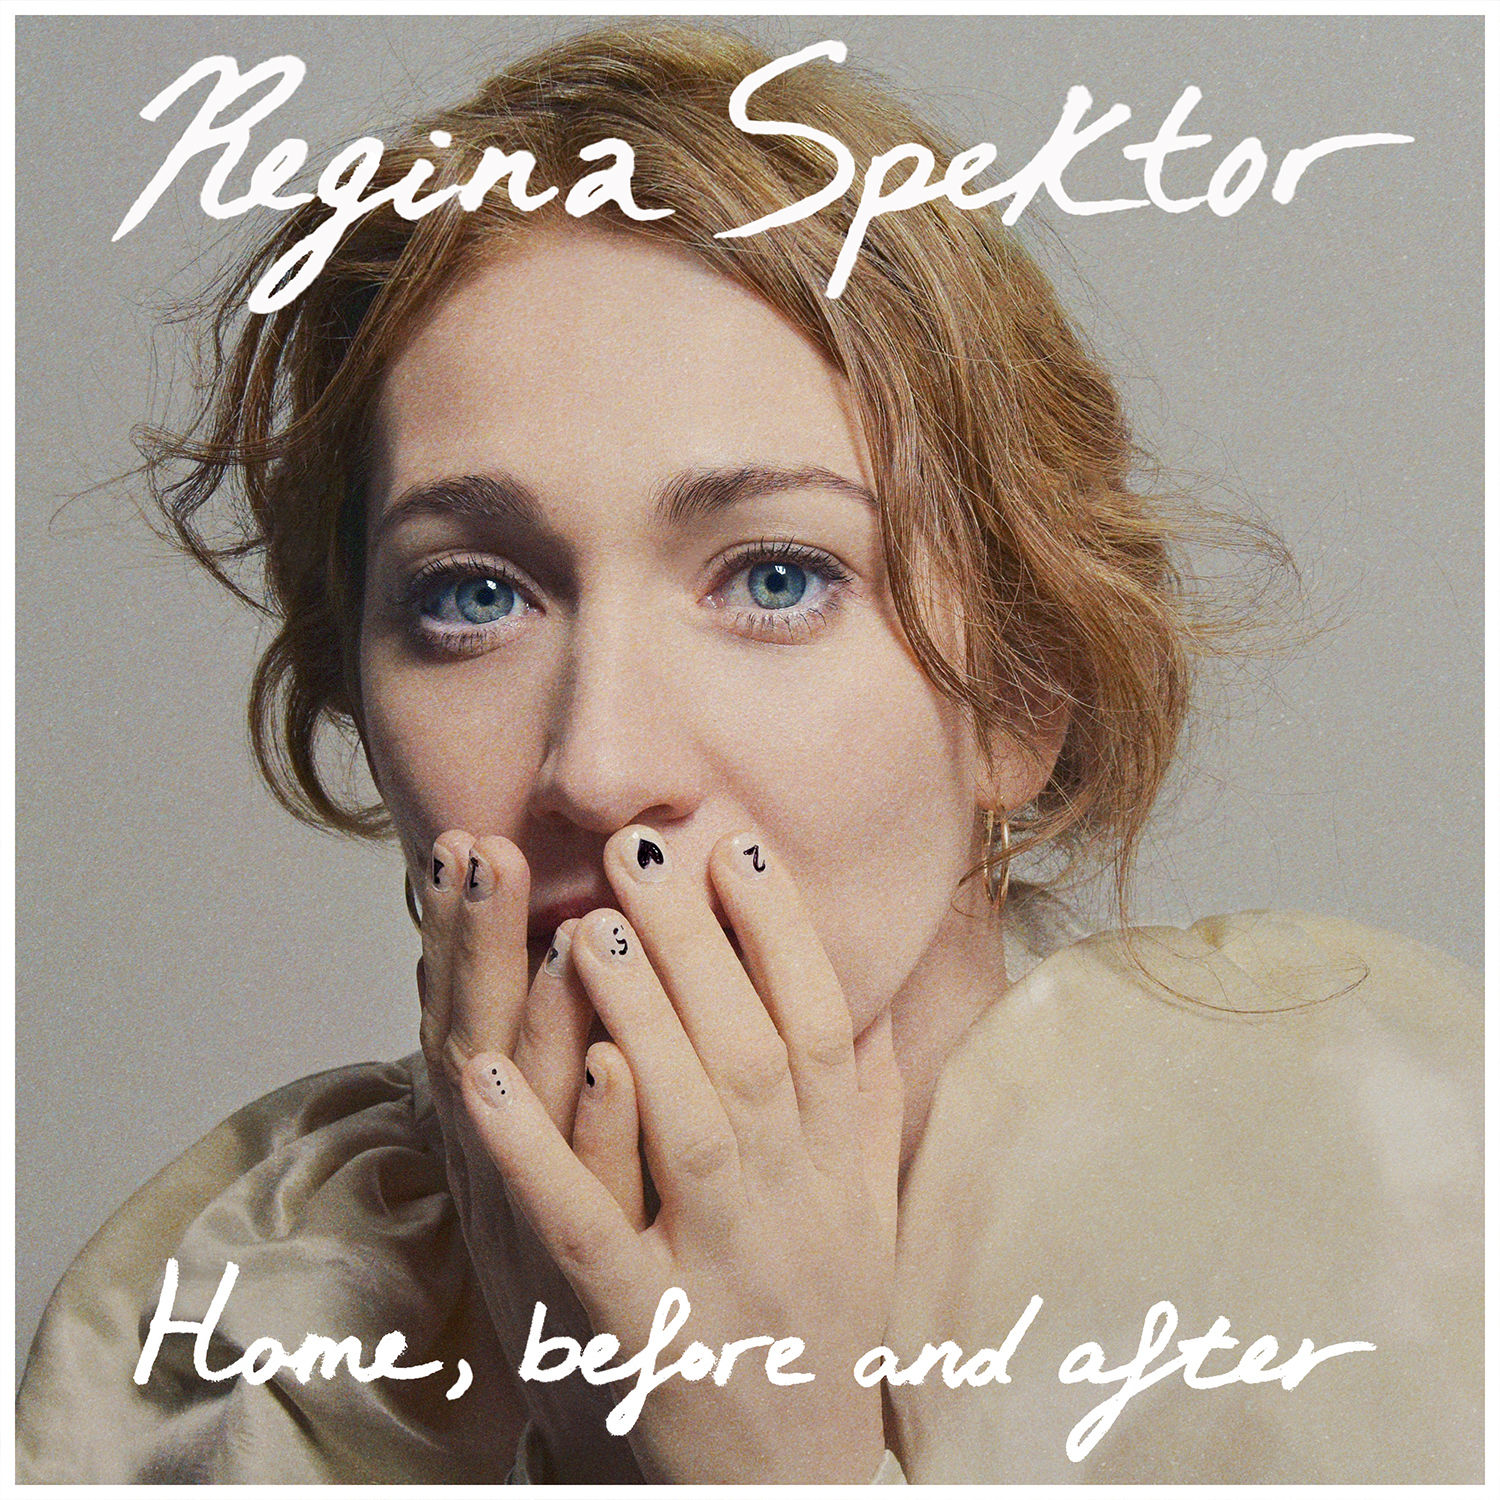 Regina Spektor - 2022 - Home, before and after